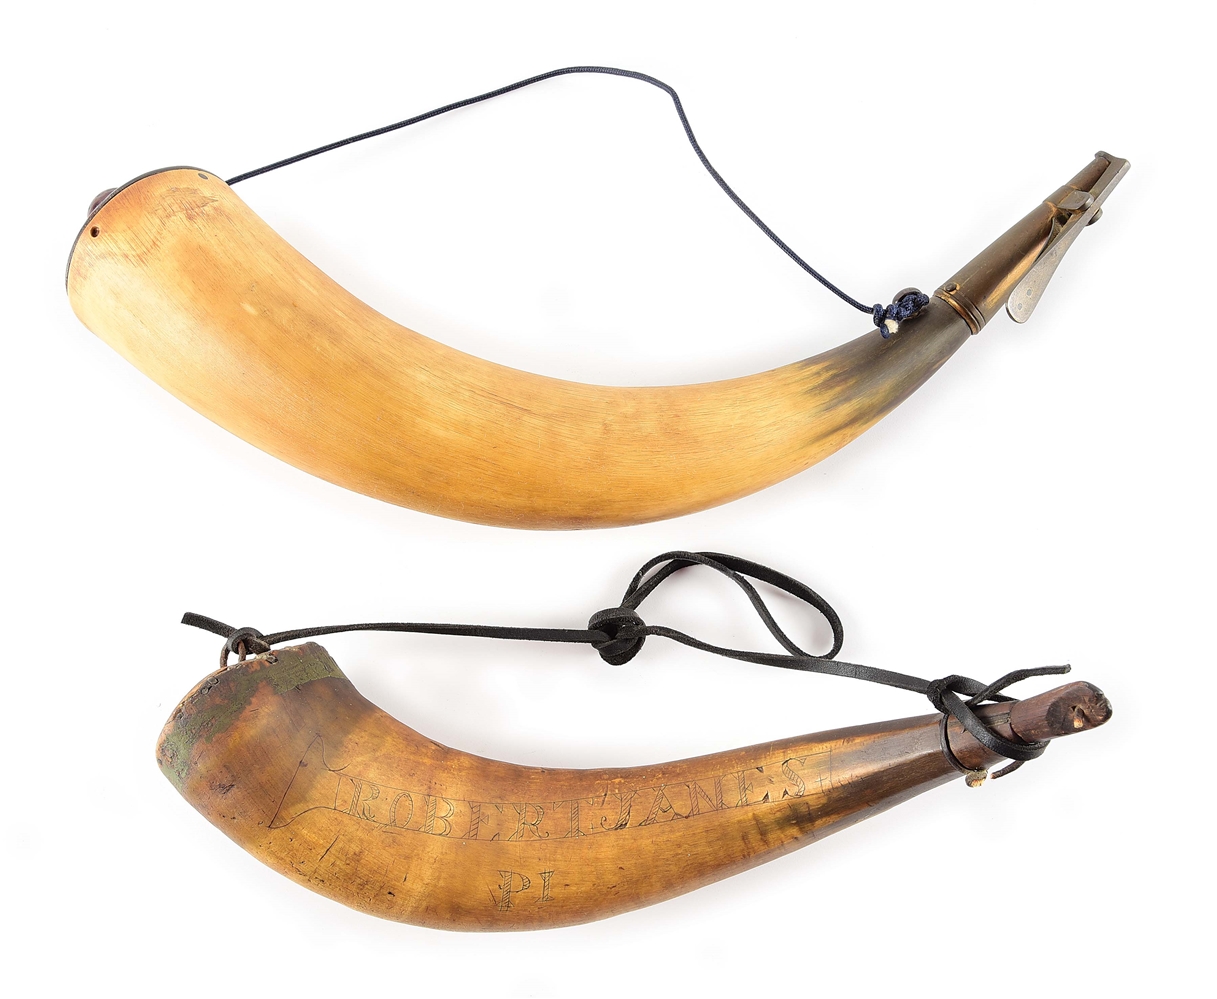 LOT OF 2: LARGE ARTILLERY POWDER HORN AND ENGRAVED HORN OF ROBERT JANES.